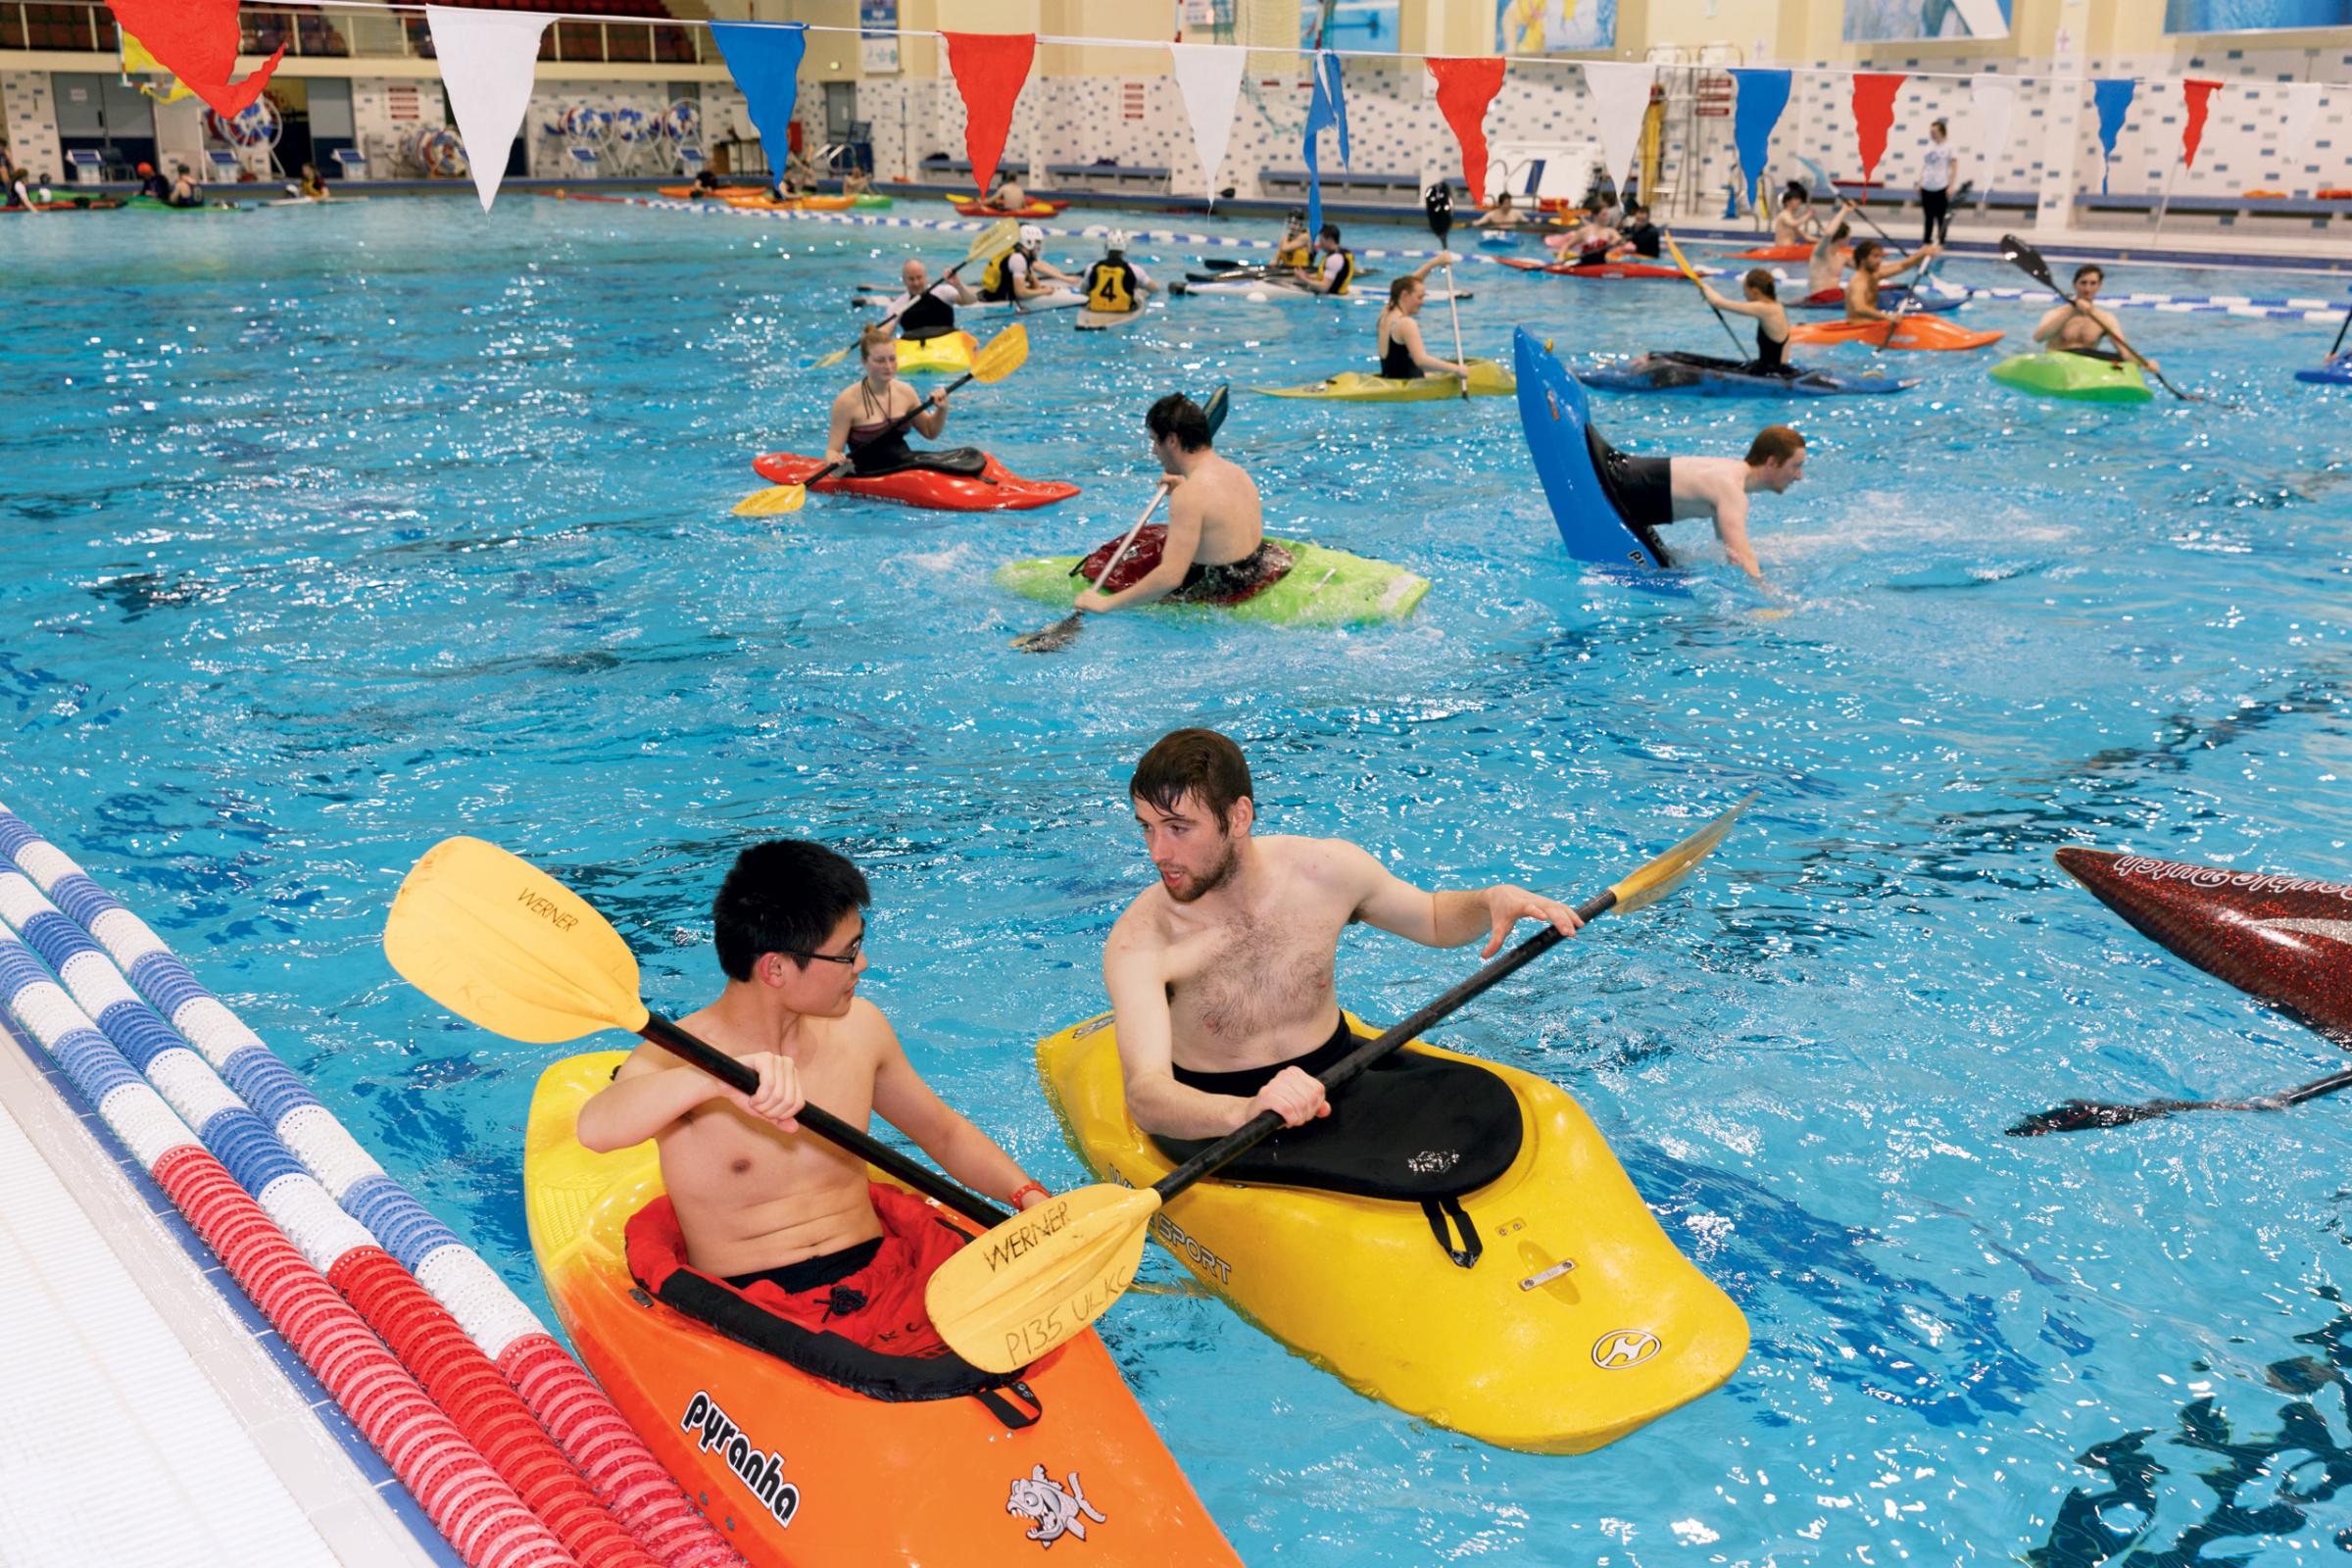 Late night indoor kayaking, University Arena Pool, University of Limerick. Ireland’s first Olympic-size pool is open to students, faculty, staff and the public, and hosts boating, water safety and sports training activities in addition to swimming.